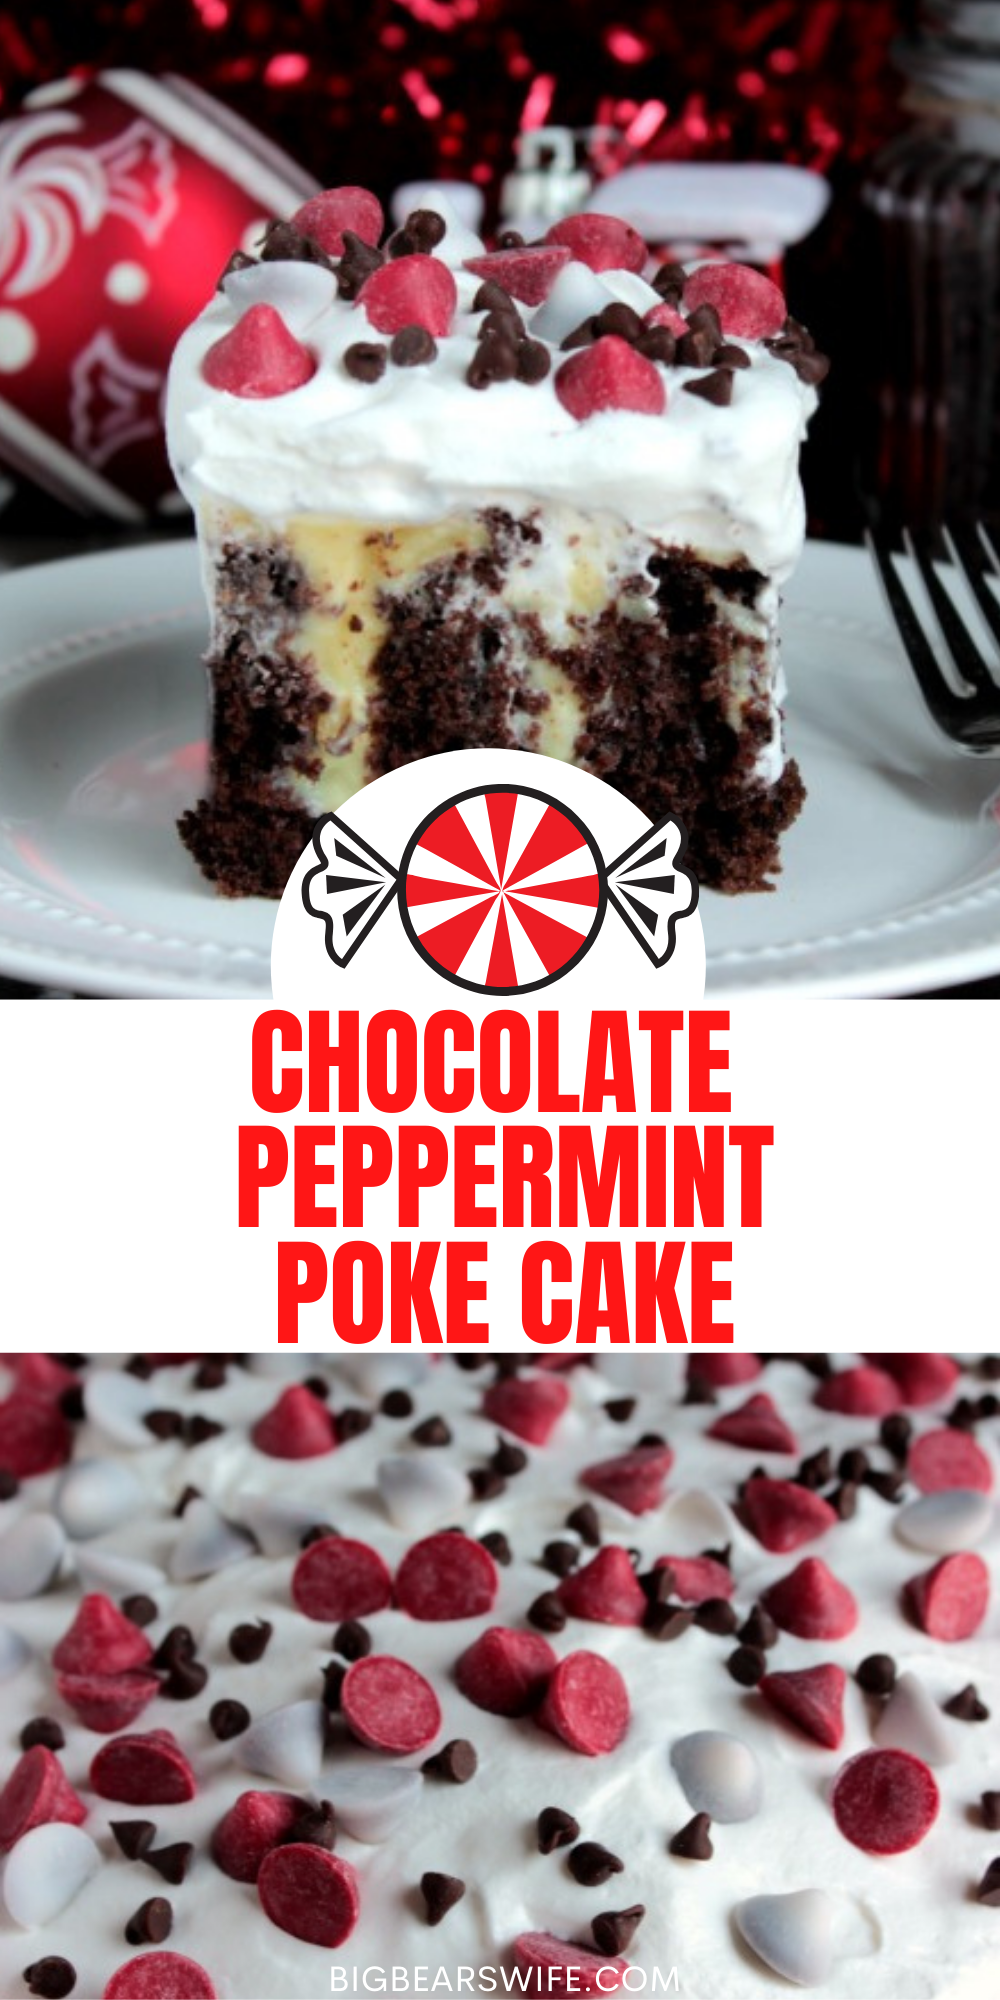 Chocolate Peppermint Poke Cake is filled with everything you love about the holidays but it's also easy enough to make without any fuss! via @bigbearswife